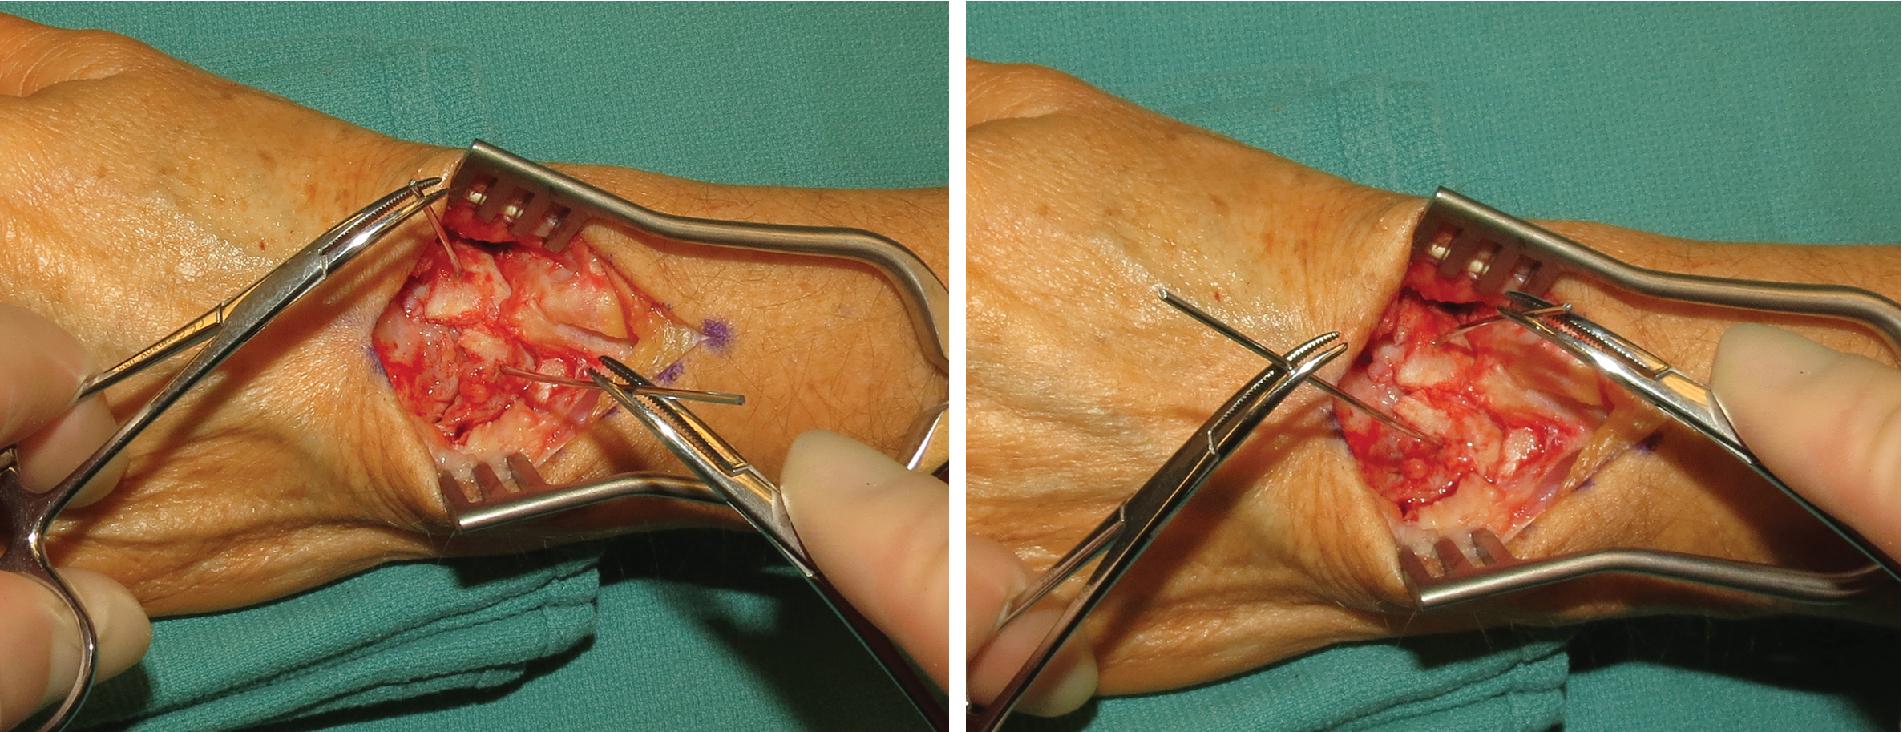 FIGURE 22.6, Correction of the DISI deformity by extending the scaphoid and flexing the lunate. DISI , Dorsal intercalated segment instability.